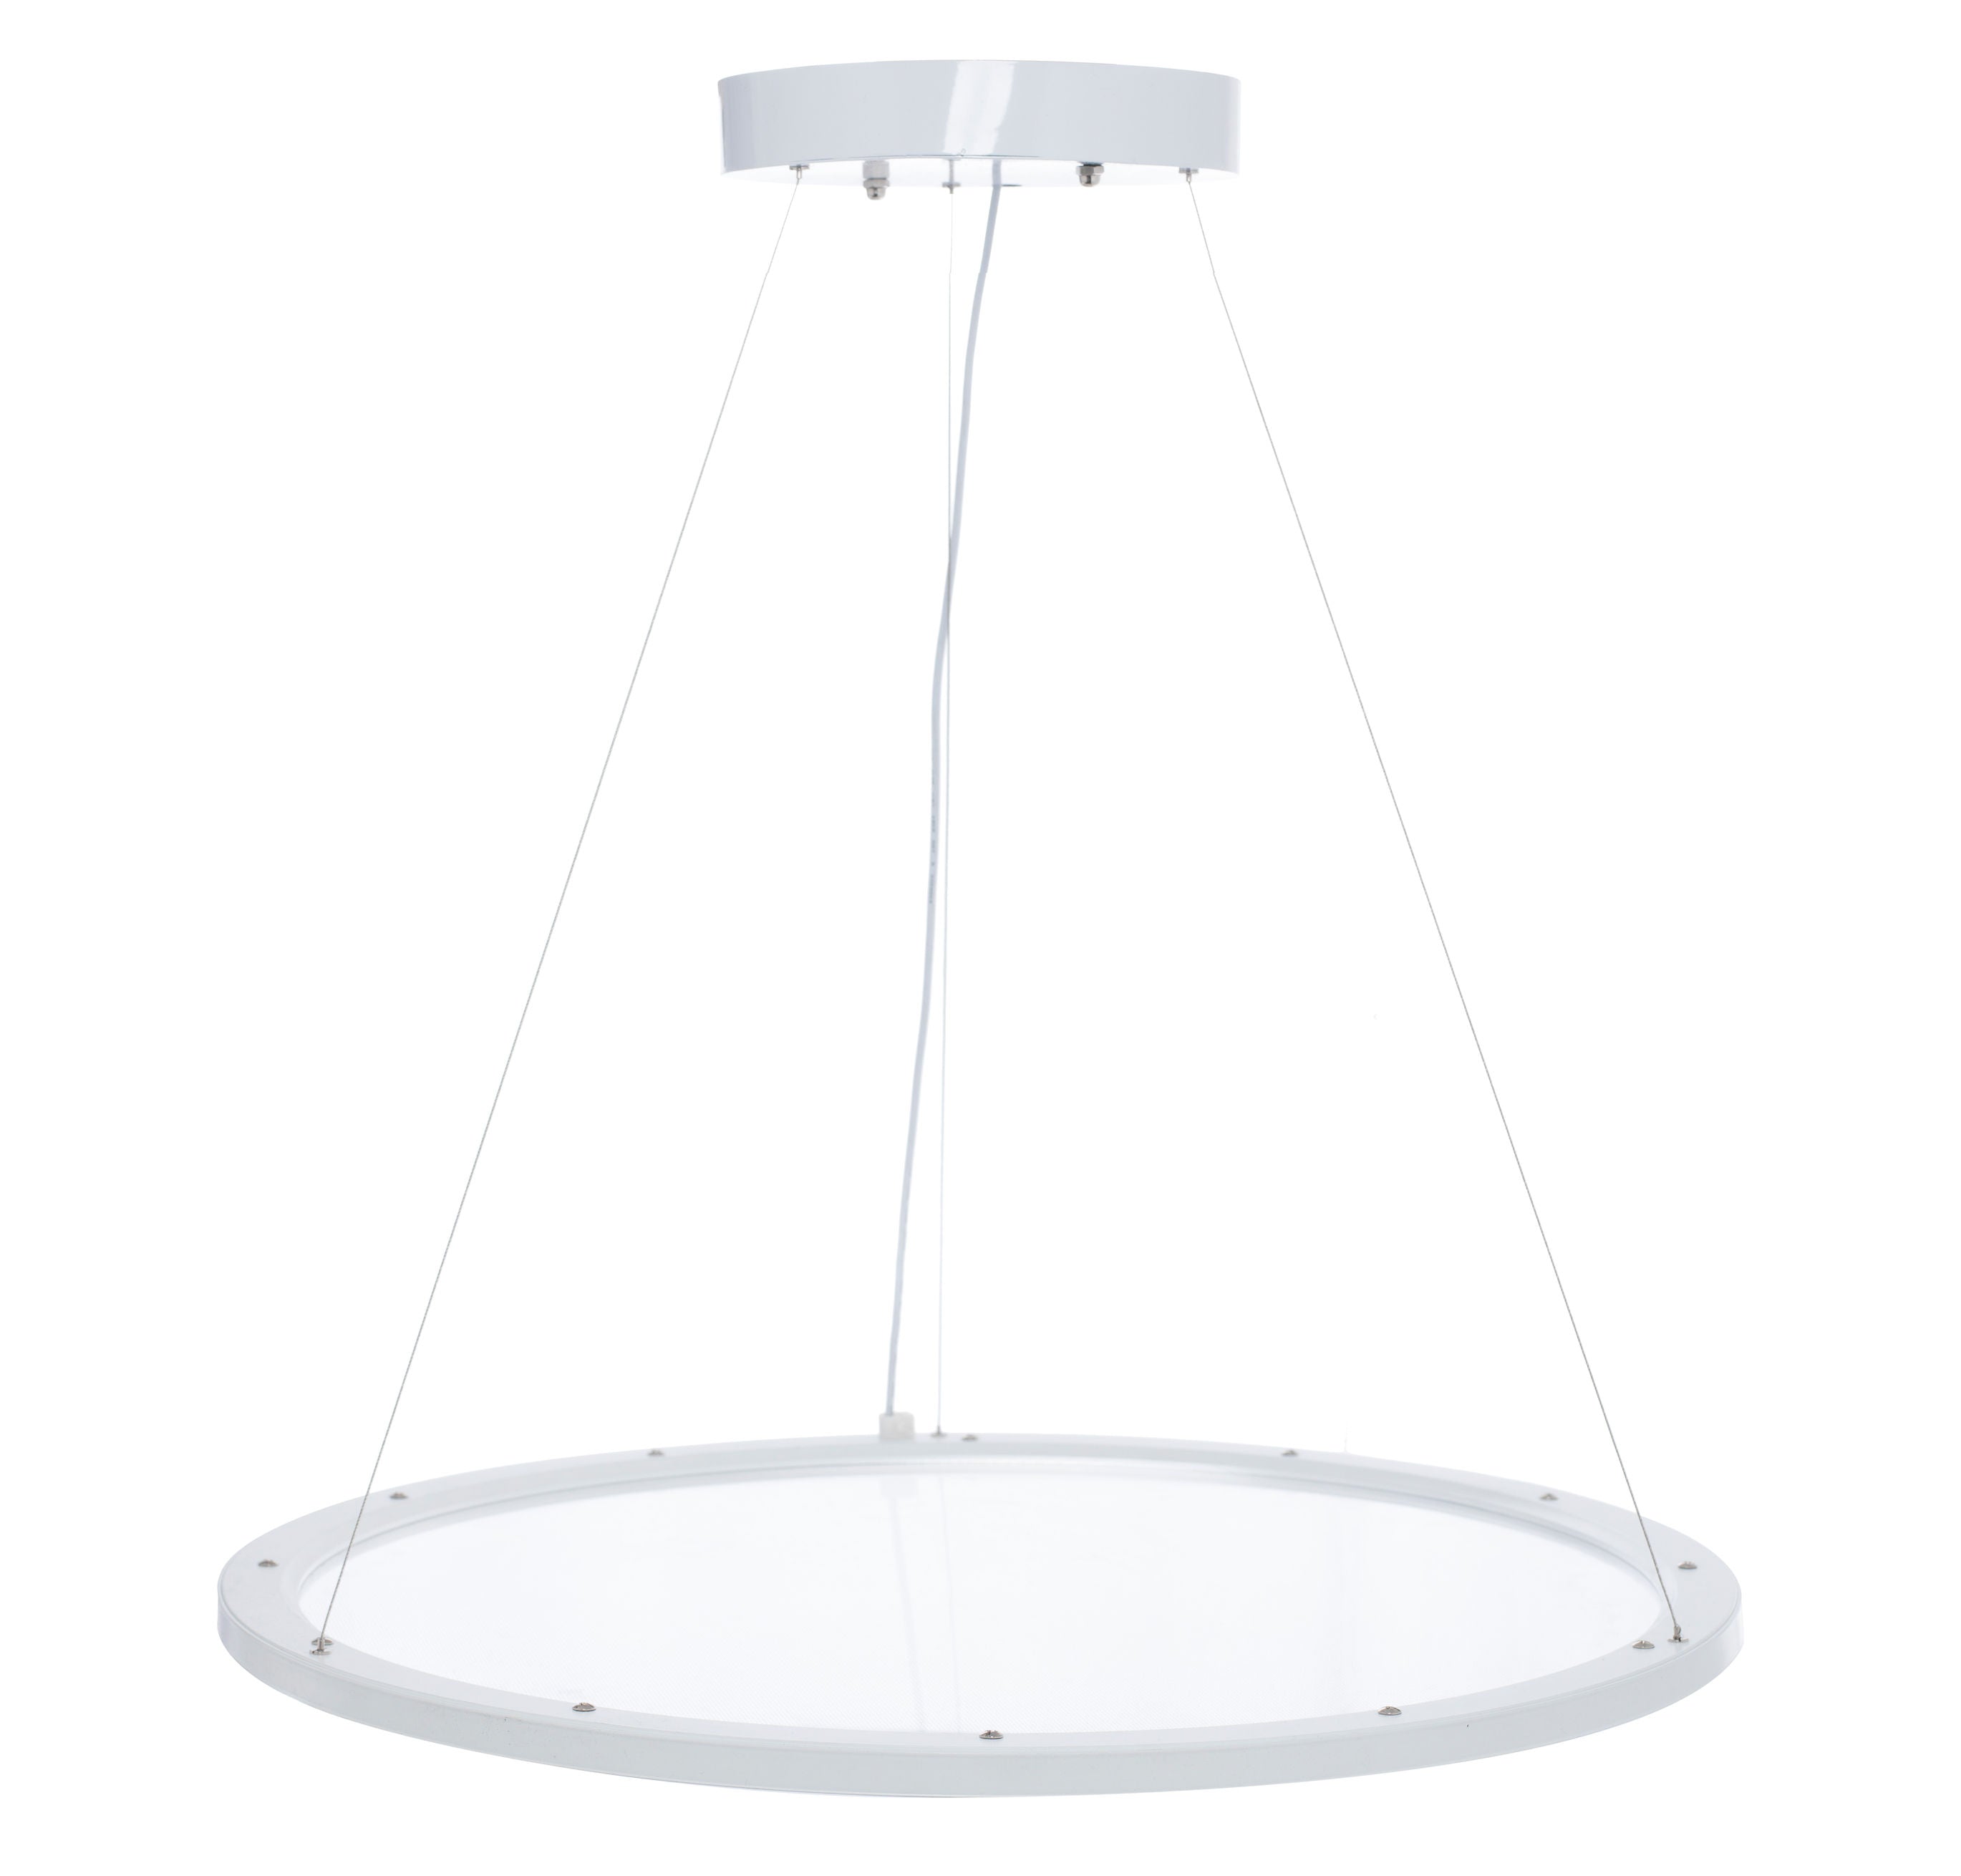 Westgate SRPL-40W-40K-D LED Suspended Up/Down Clear Round Panel Light - White